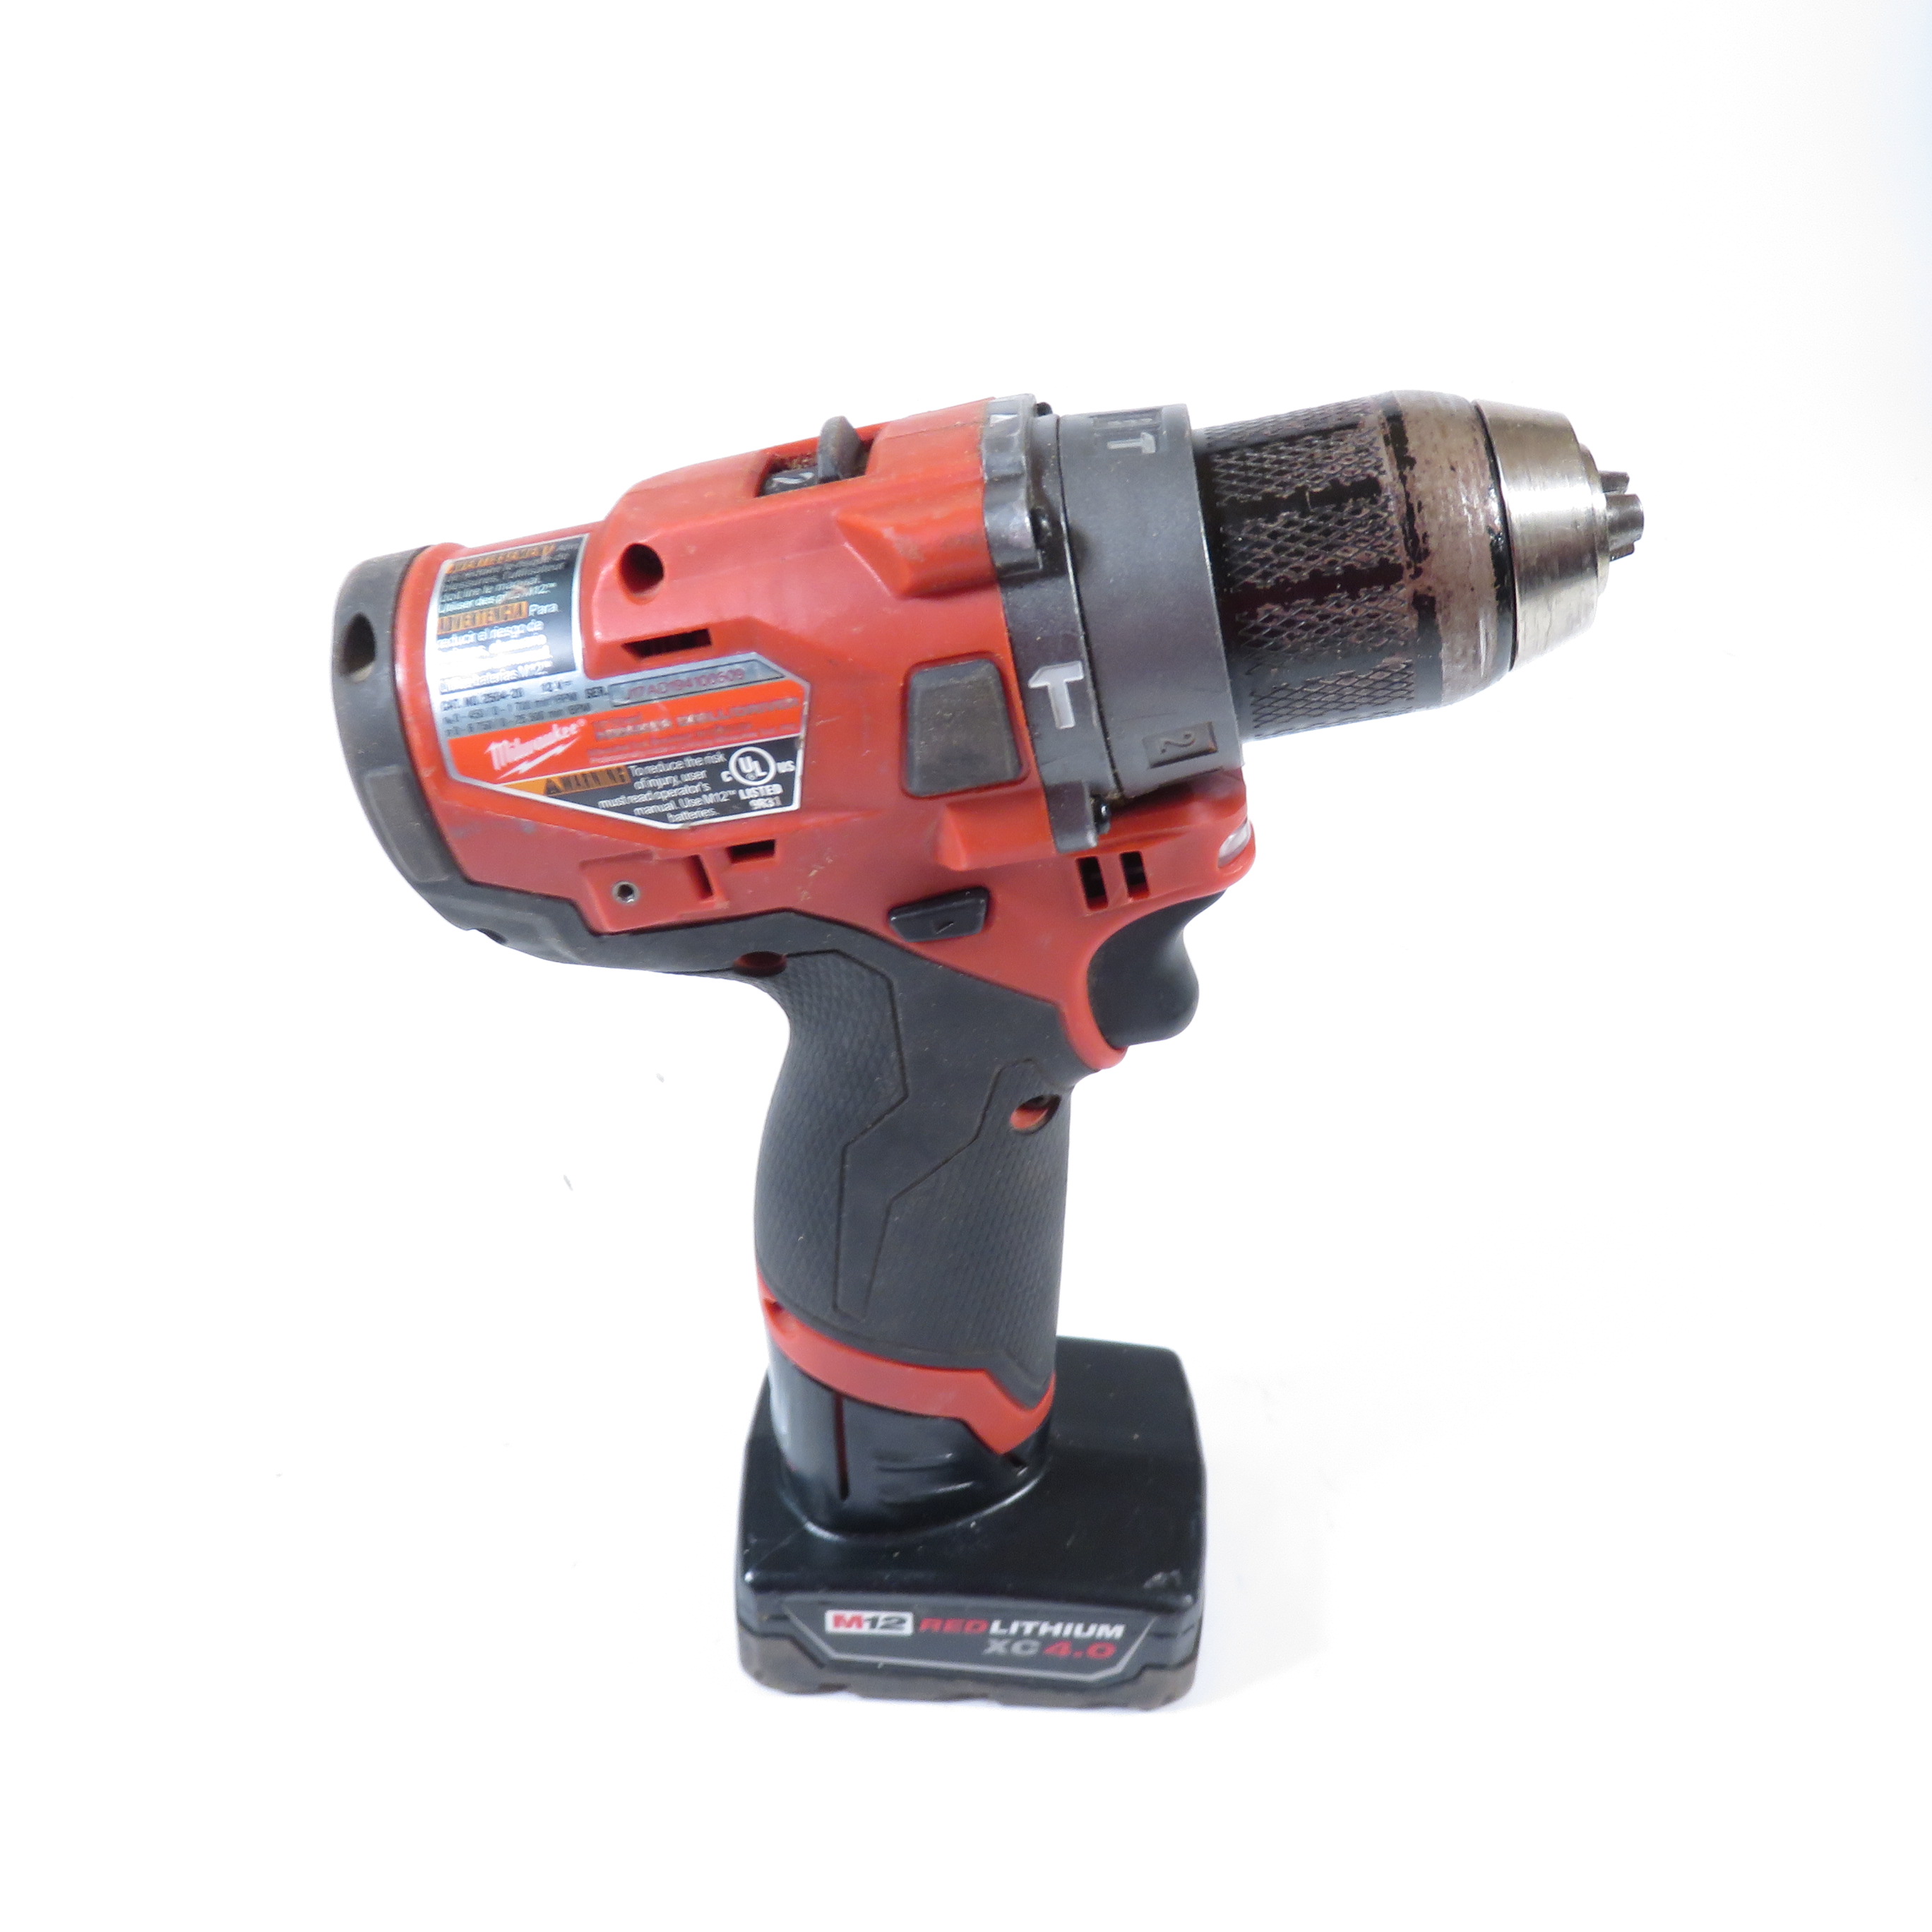  Milwaukee M12 FUEL 12V Lithium-Ion Brushless Cordless 1/2 in.  Drill Driver (Tool-Only) : Tools & Home Improvement